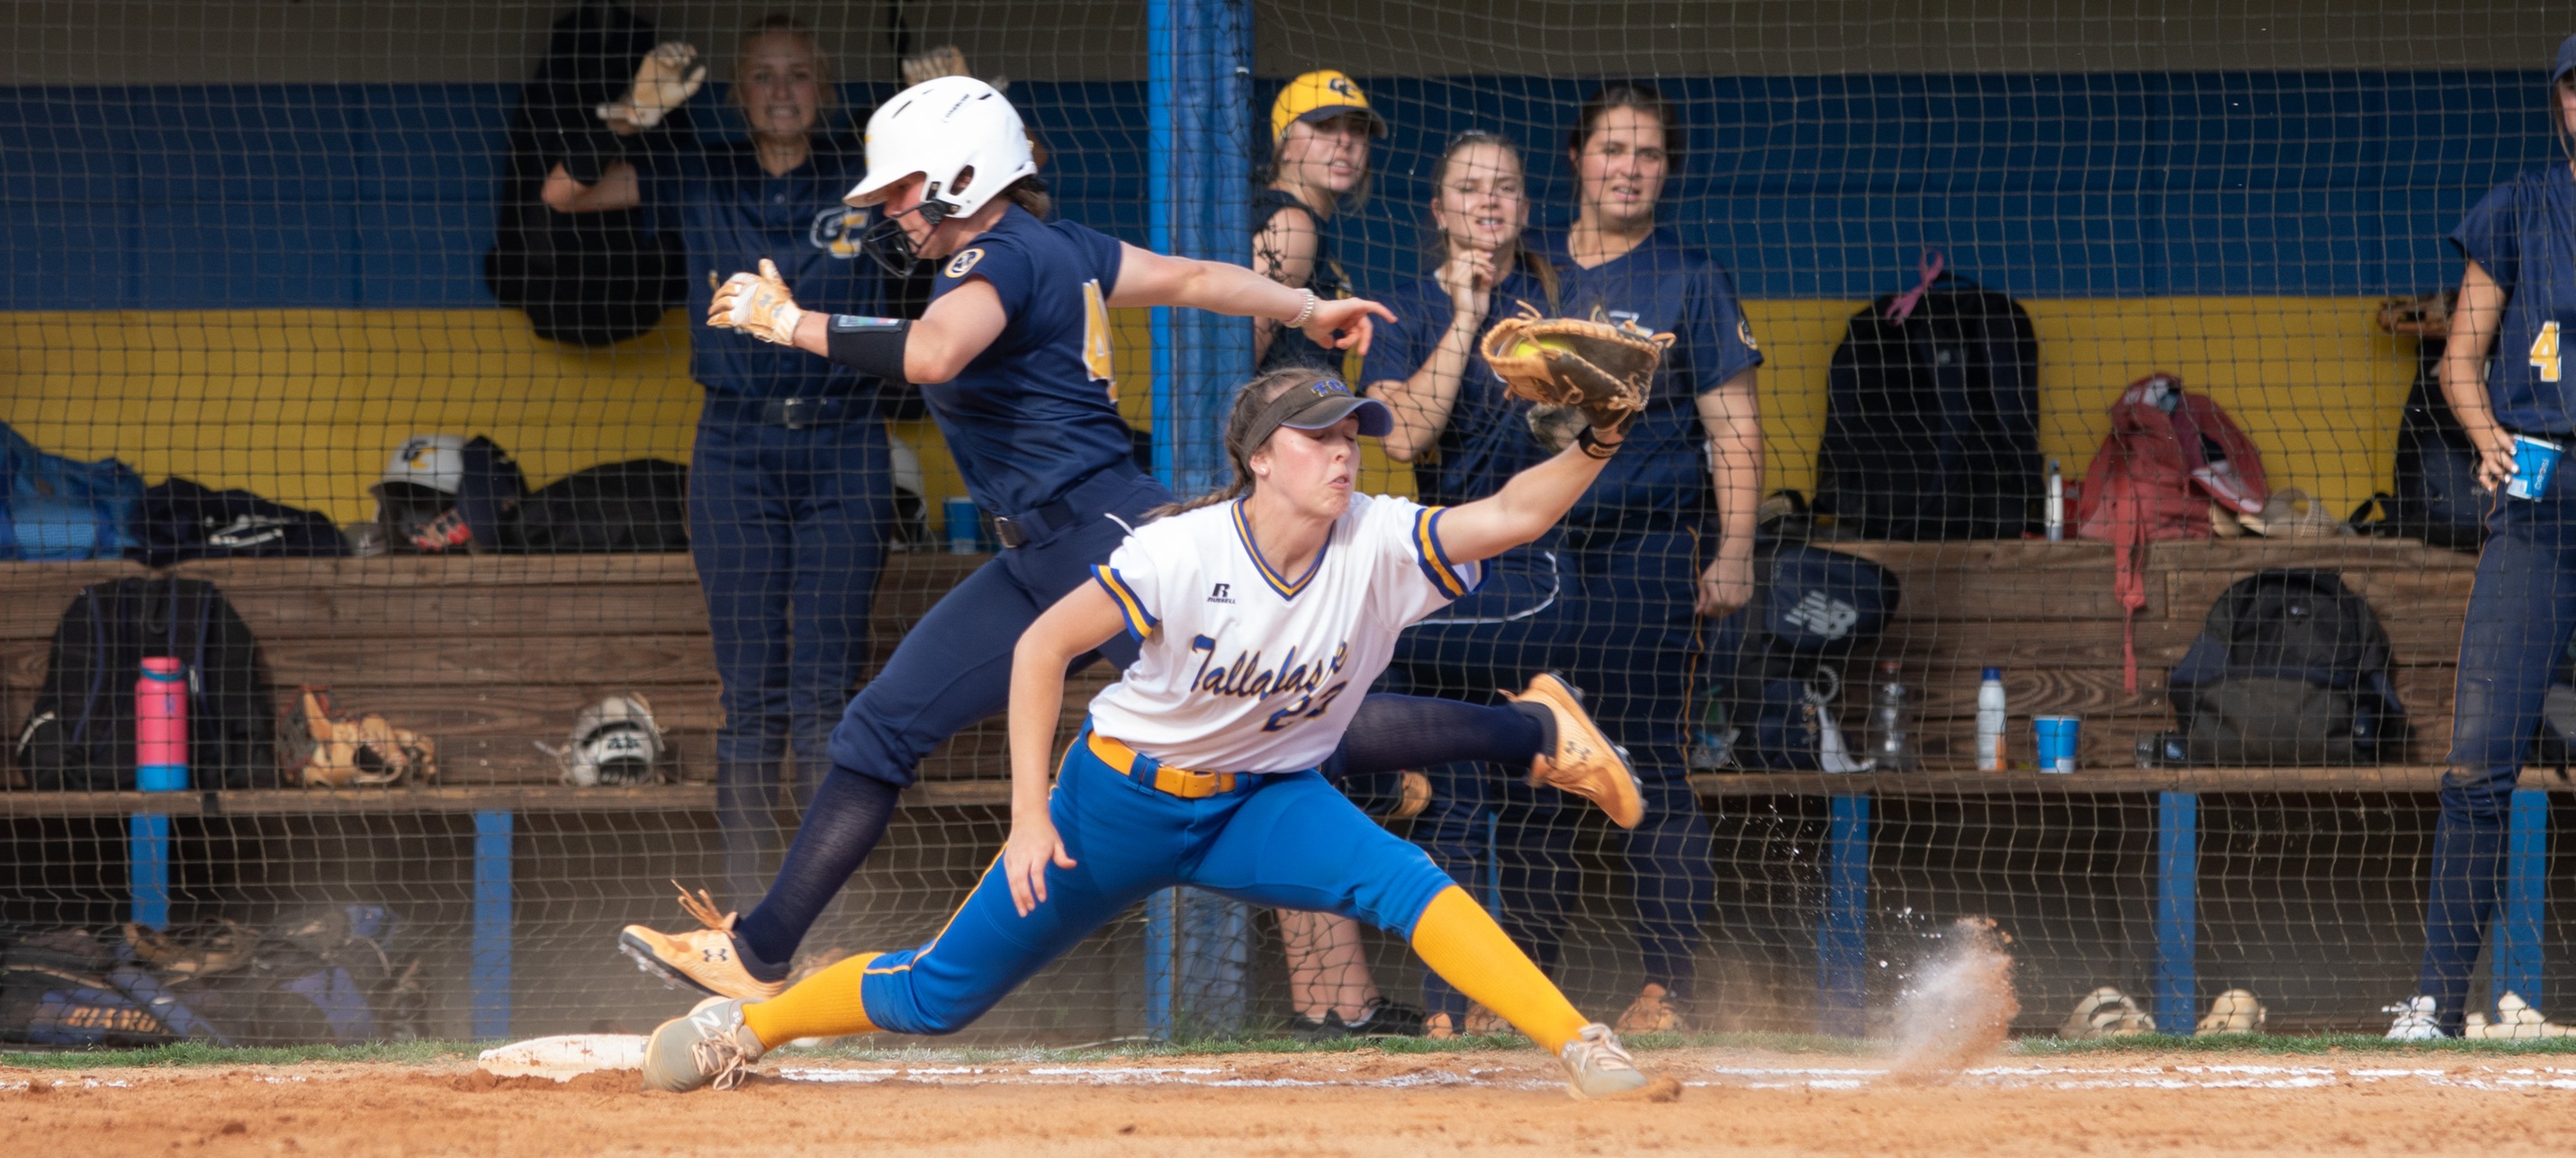 Maddy Walther extends to make the play at first (photo courtesy of Michael Schwarz)